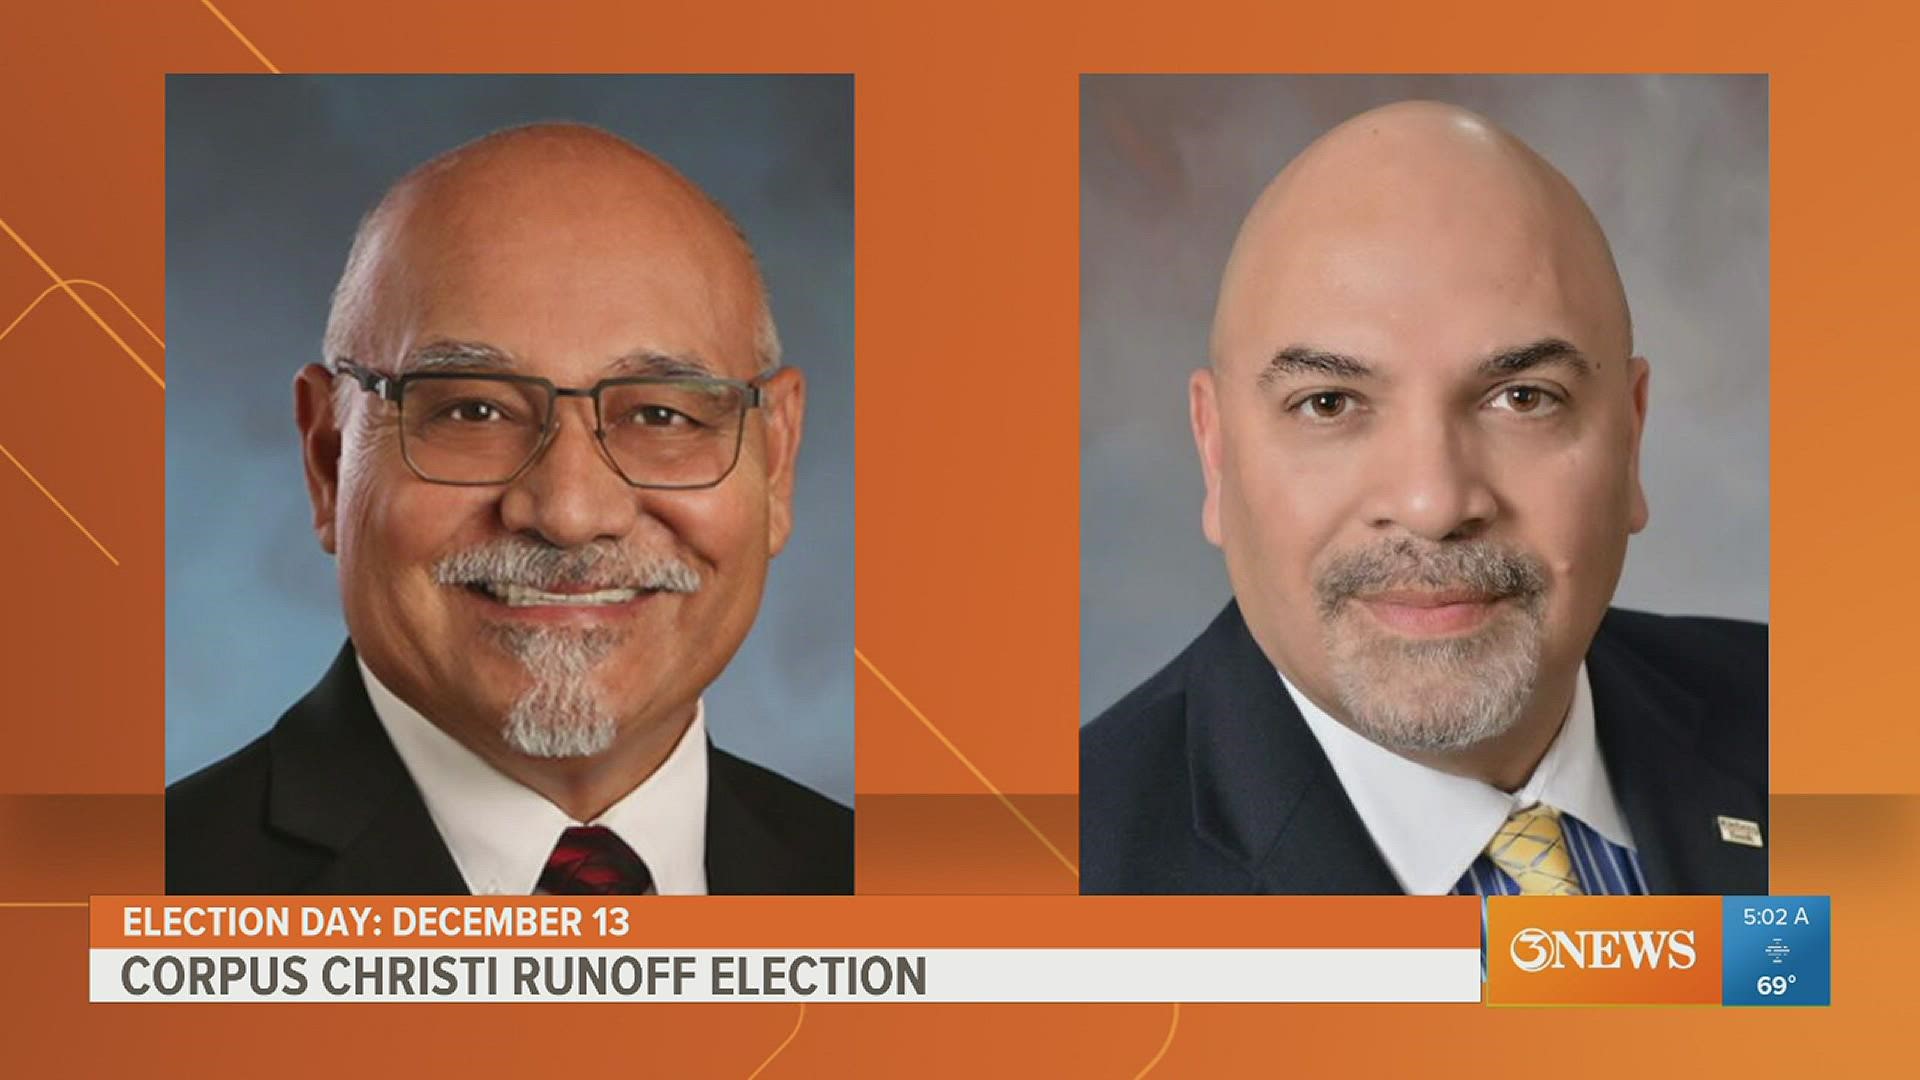 Three Corpus Christi city council races require runoff elections after being too close to call during November's general election.